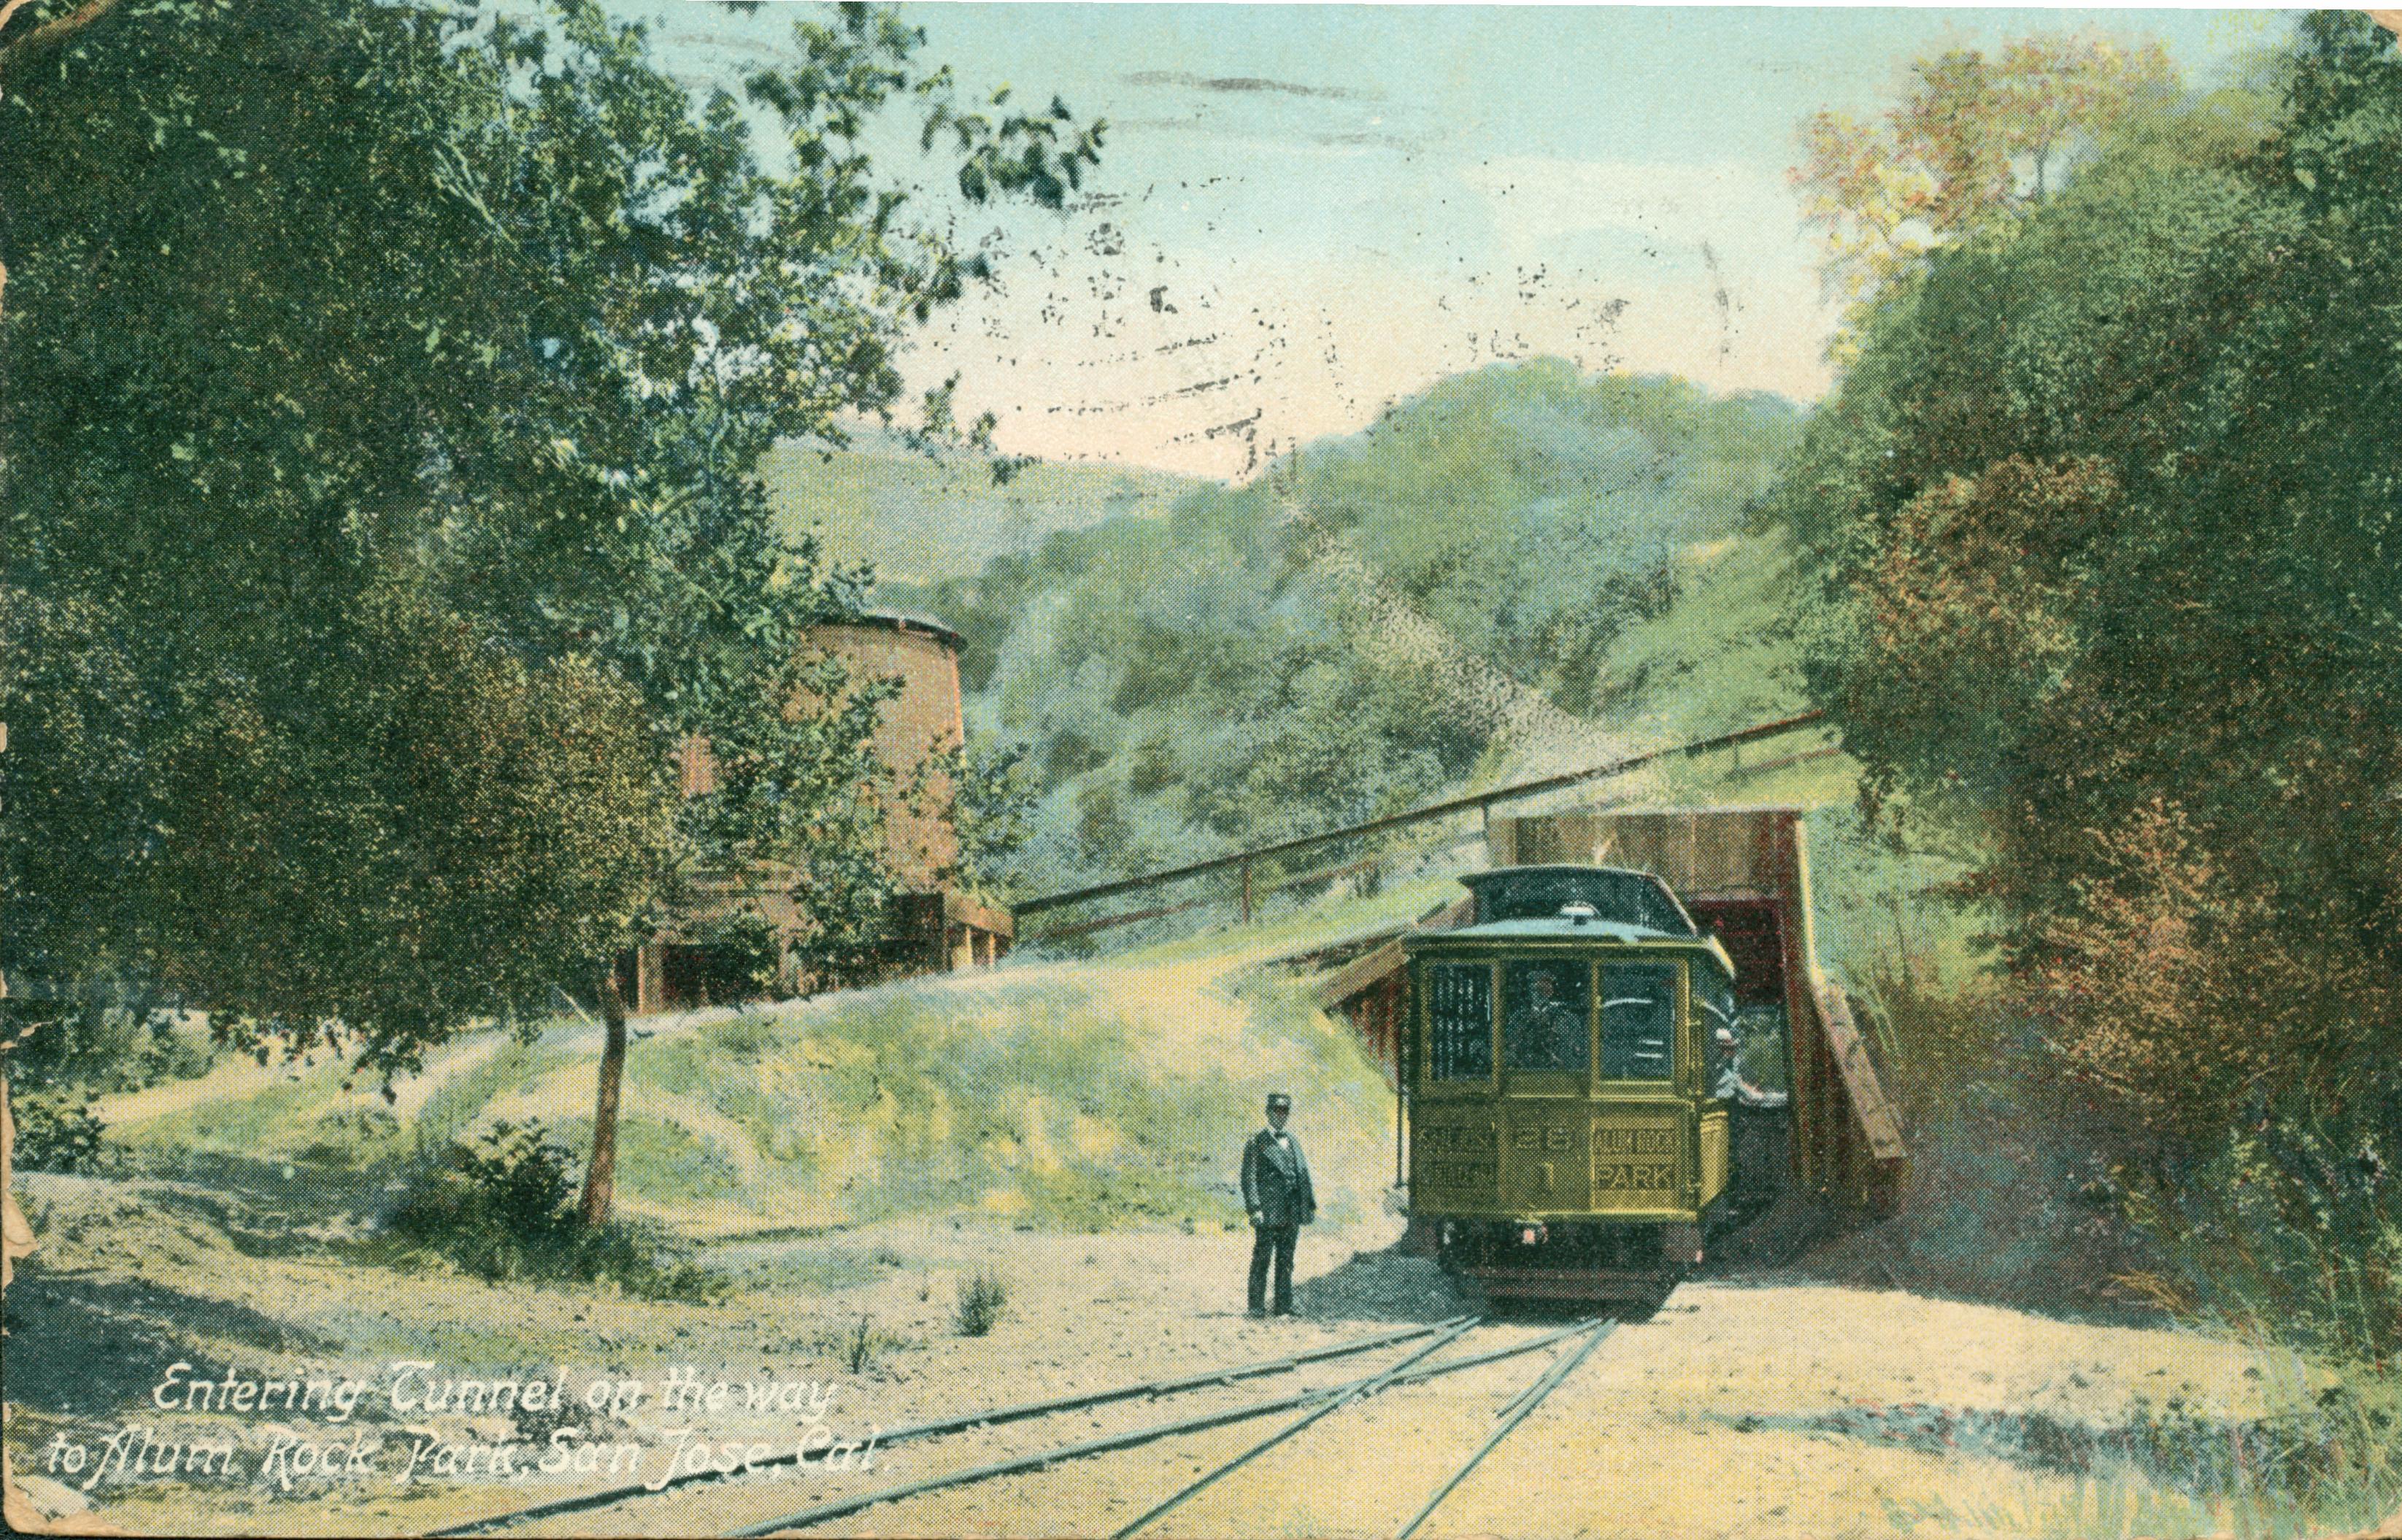 Color view of train and conductor heading into a tunnel on the way to Alum Rock Park, trees, hillside and water tower in the background